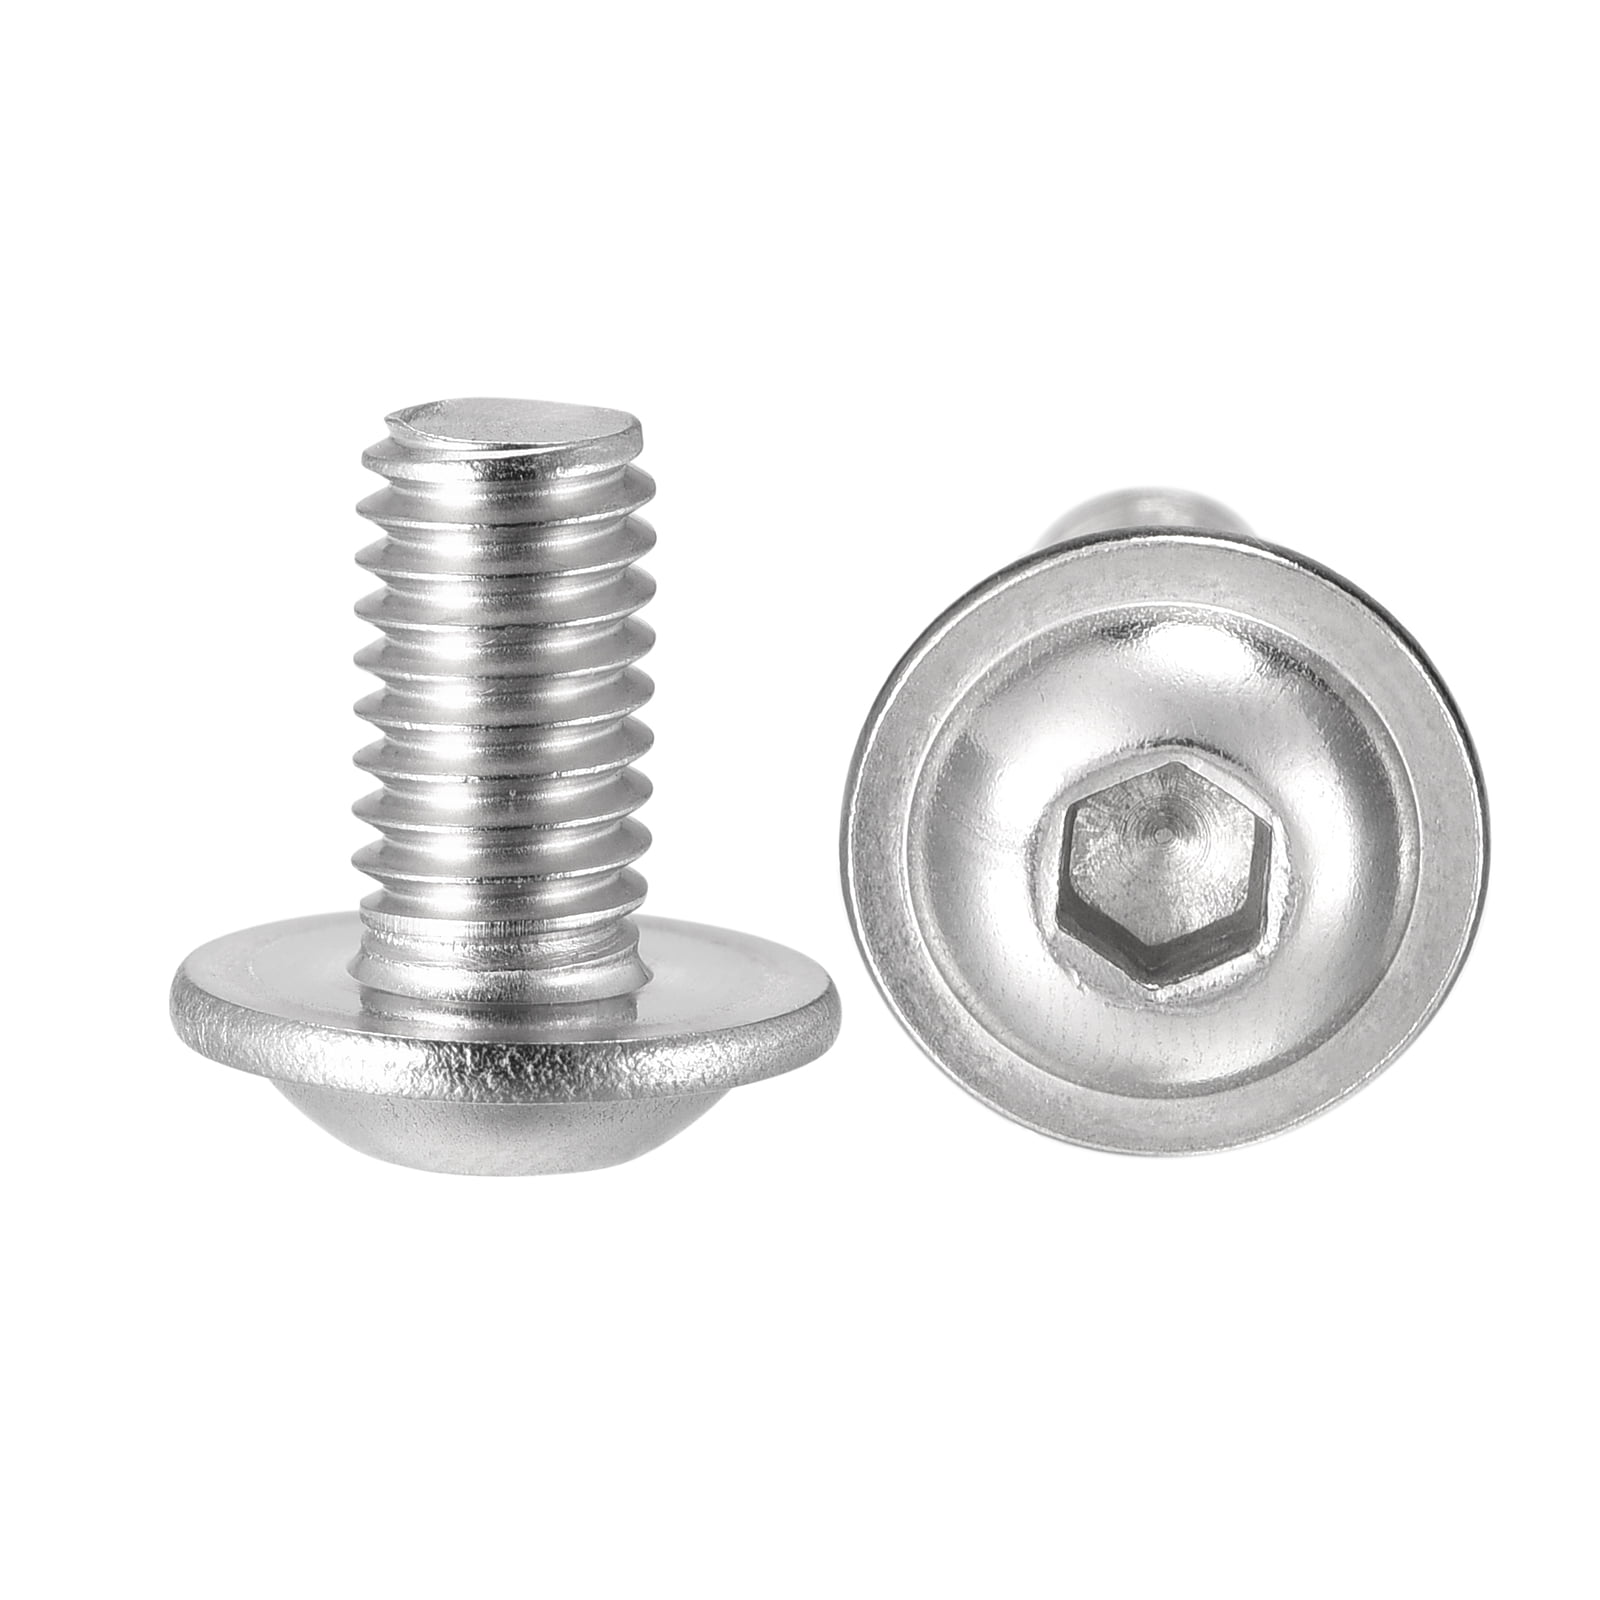 Uxcell M6 x 12mm 304 Stainless Steel Flanged Button Head Socket Cap Screws  20 Pack